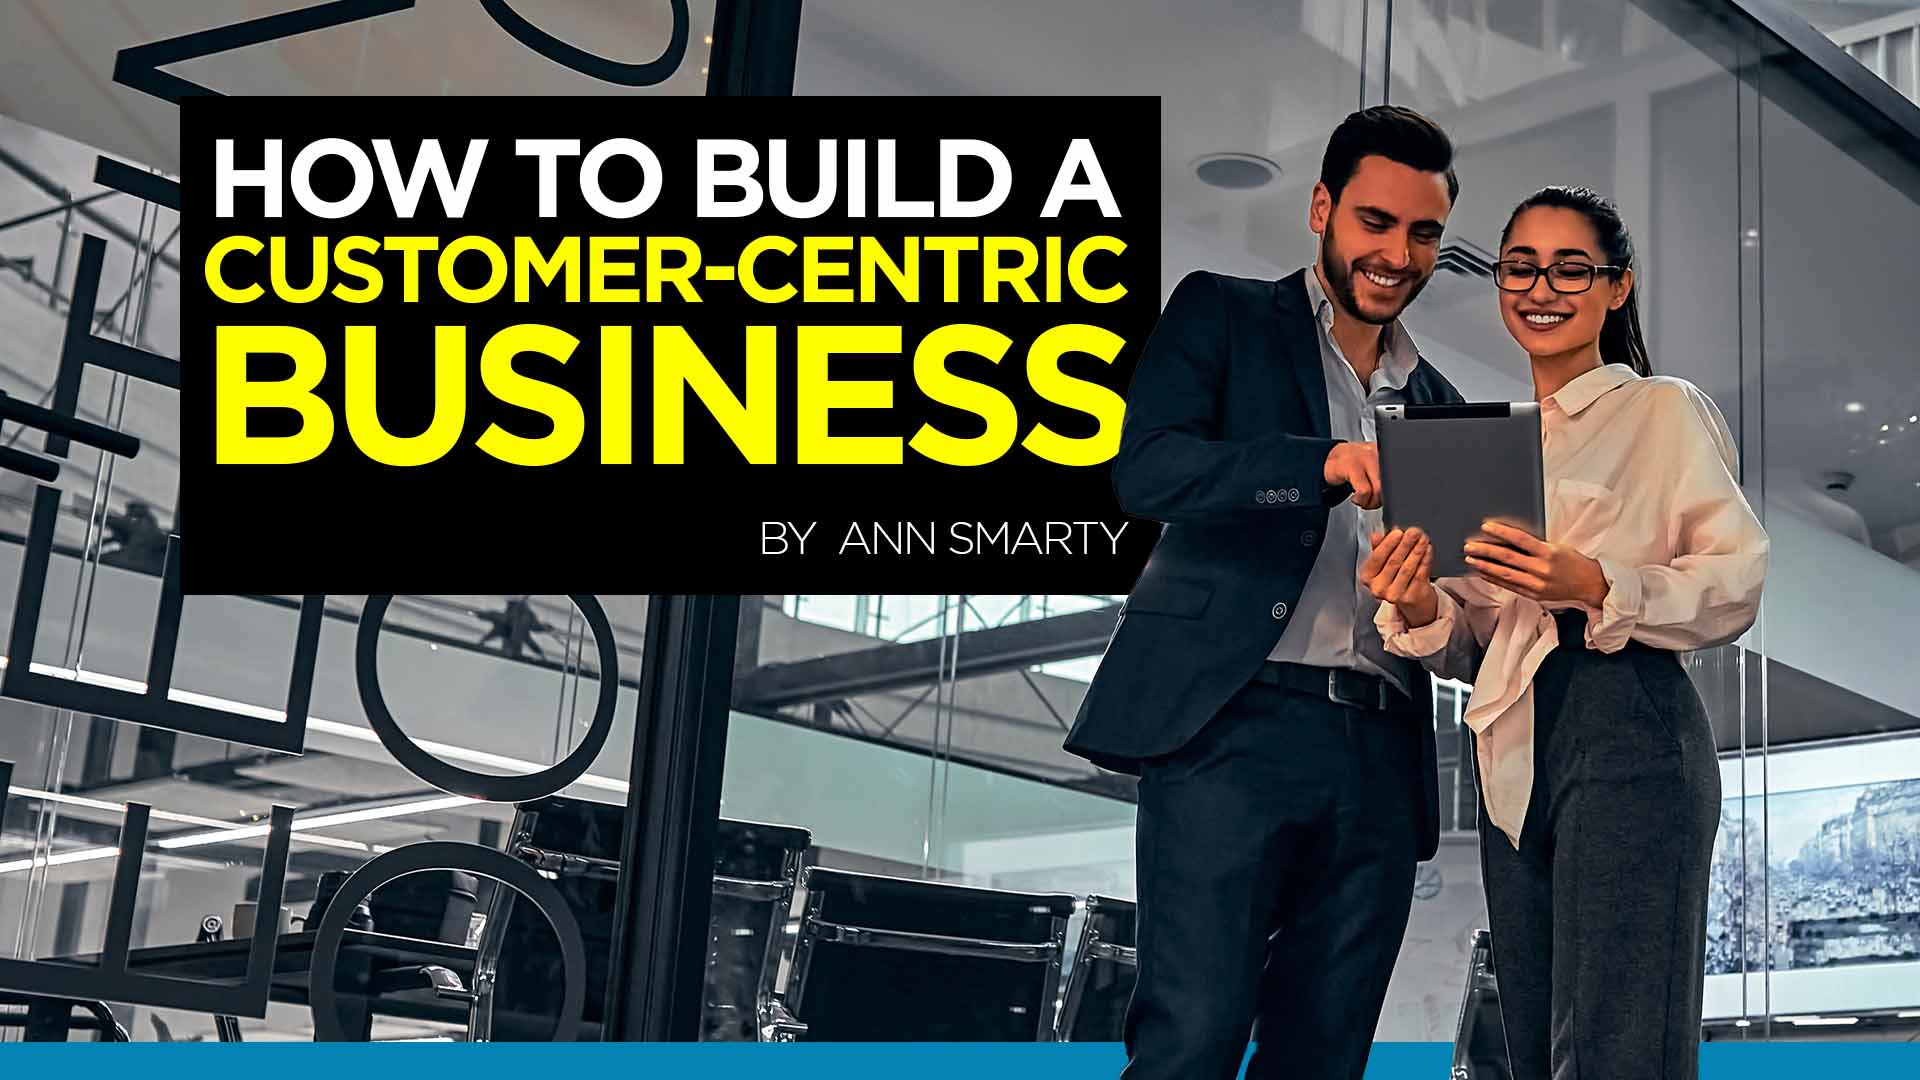 How to Build a Customer-Centric Business